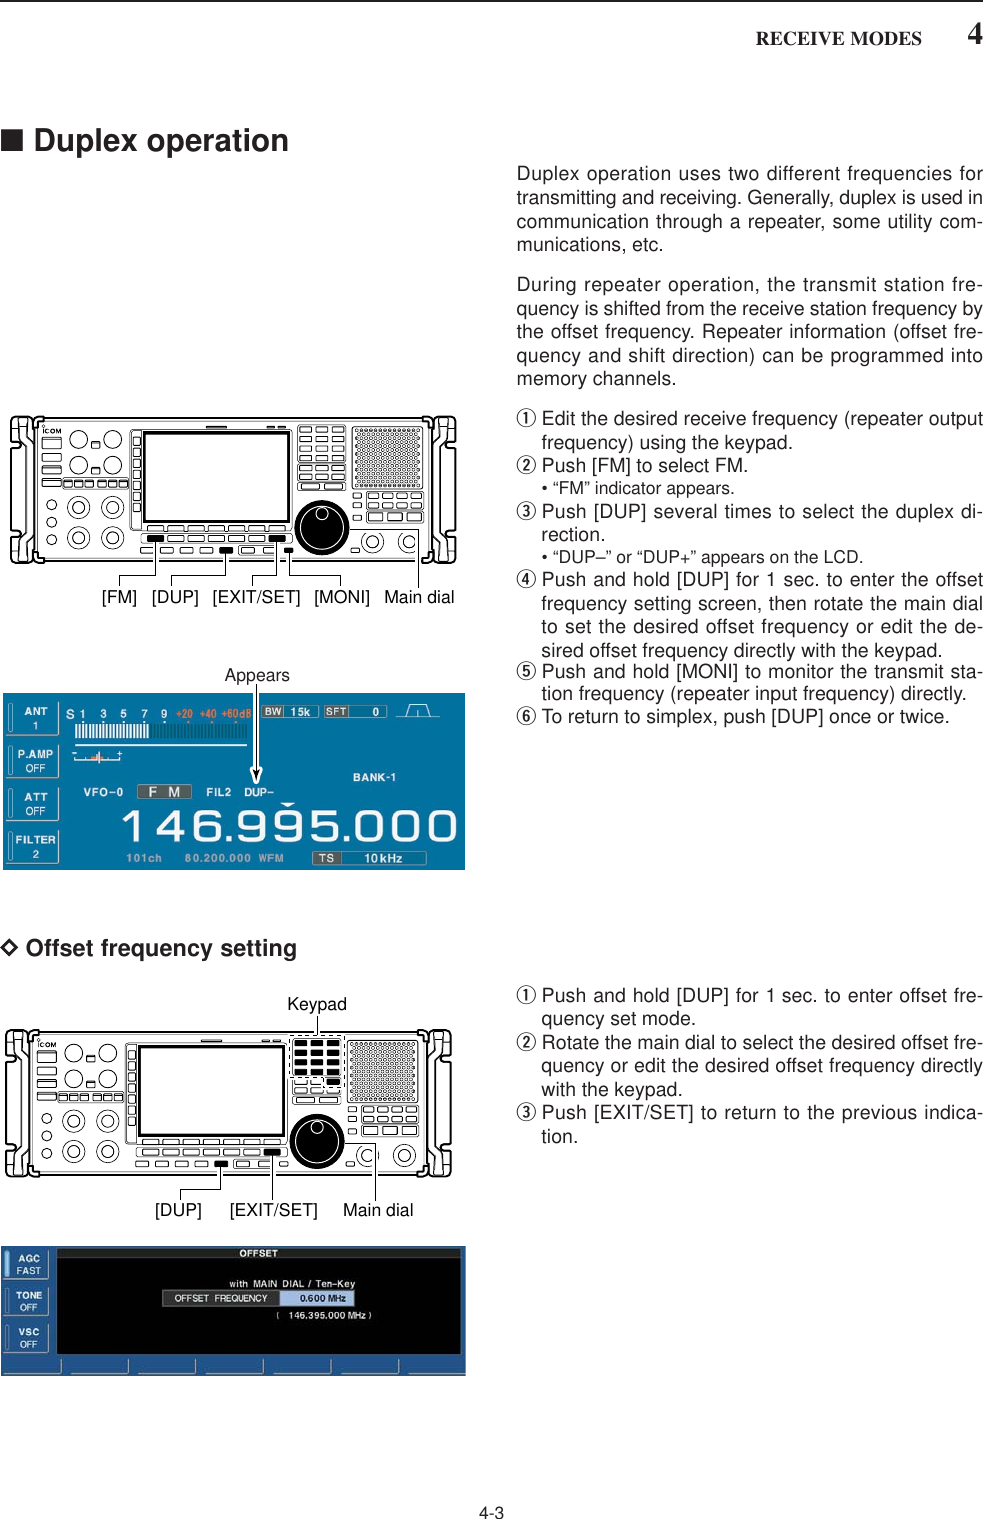 4-34RECEIVE MODES■Duplex operationDuplex operation uses two different frequencies fortransmitting and receiving. Generally, duplex is used incommunication through a repeater, some utility com-munications, etc.During repeater operation, the transmit station fre-quency is shifted from the receive station frequency bythe offset frequency. Repeater information (offset fre-quency and shift direction) can be programmed intomemory channels.qEdit the desired receive frequency (repeater outputfrequency) using the keypad.wPush [FM] to select FM.• “FM” indicator appears.ePush [DUP] several times to select the duplex di-rection.• “DUP–” or “DUP+” appears on the LCD.rPush and hold [DUP] for 1 sec. to enter the offsetfrequency setting screen, then rotate the main dialto set the desired offset frequency or edit the de-sired offset frequency directly with the keypad.tPush and hold [MONI] to monitor the transmit sta-tion frequency (repeater input frequency) directly.yTo return to simplex, push [DUP] once or twice.DOffset frequency settingqPush and hold [DUP] for 1 sec. to enter offset fre-quency set mode.wRotate the main dial to select the desired offset fre-quency or edit the desired offset frequency directlywith the keypad.ePush [EXIT/SET] to return to the previous indica-tion.[EXIT/SET][DUP] Main dialKeypadAppears[EXIT/SET] [MONI][FM] [DUP] Main dial